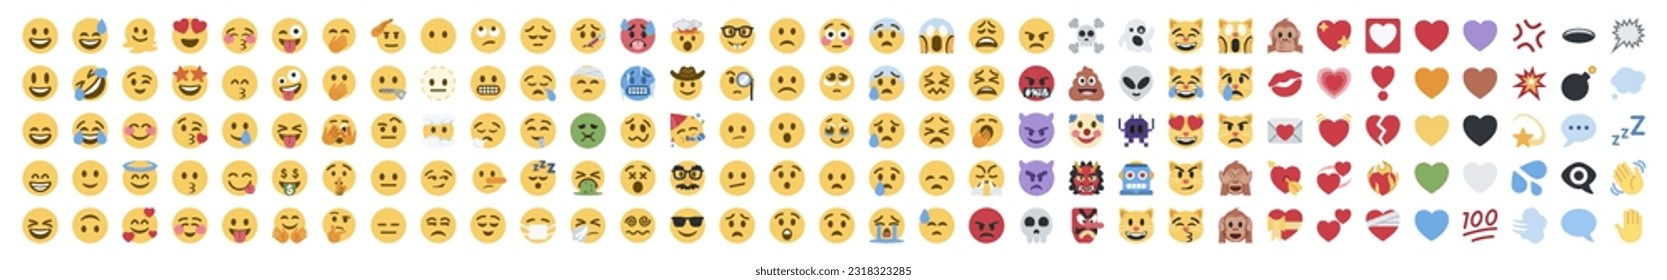 Big set of iOS emoji. Funny emoticons faces with facial expressions. Full editable vector icons. iOS emoji. Detailed emoji icon from the WhatsApp, Facebook, twitter, instagram. svg